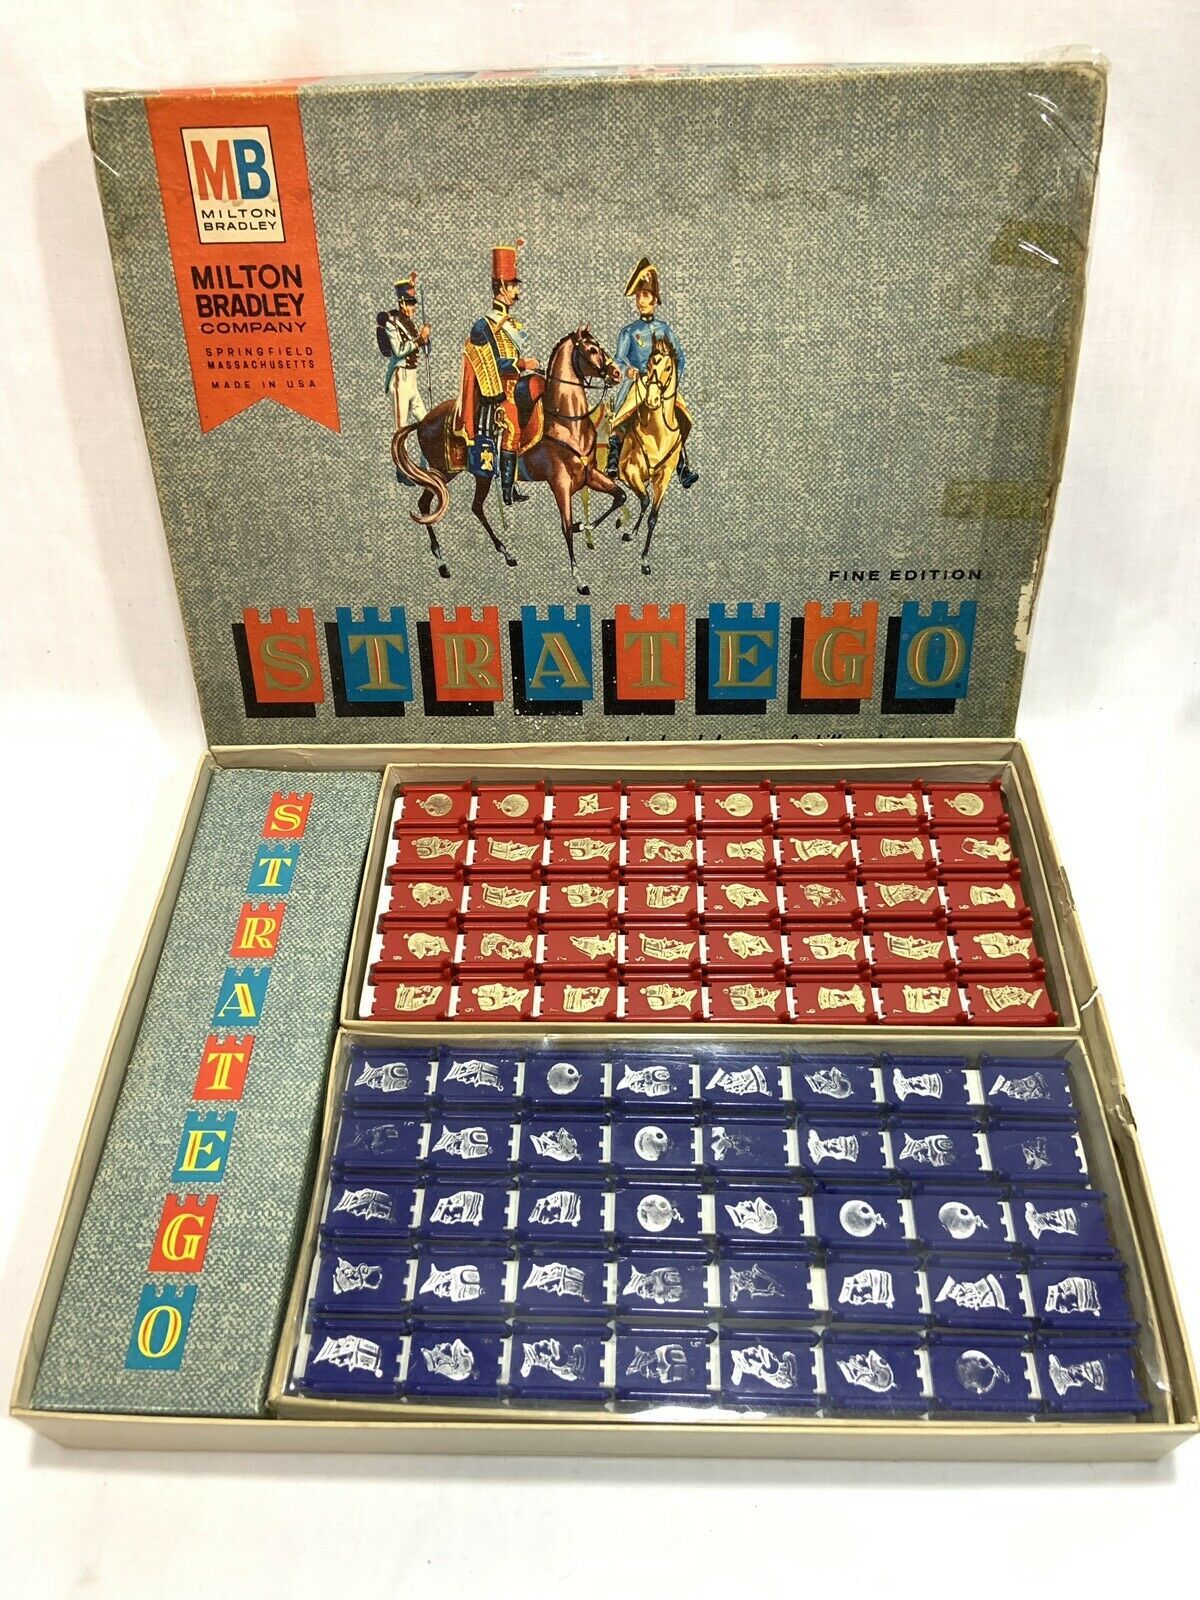 stratego game pieces new